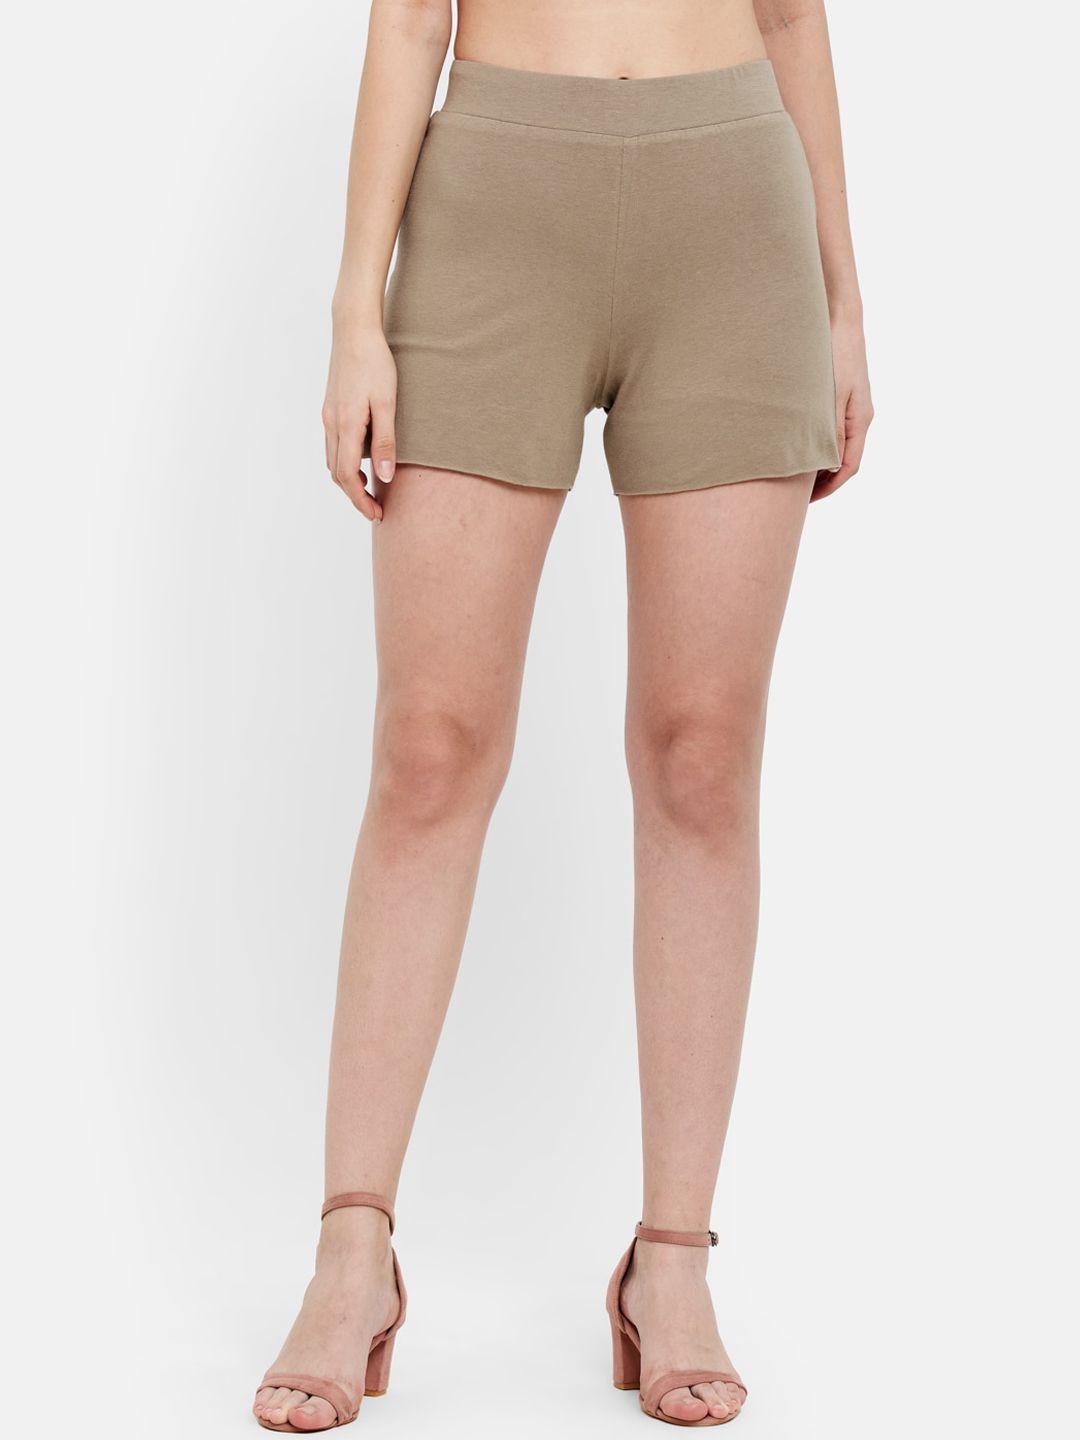 unmade women taupe shorts